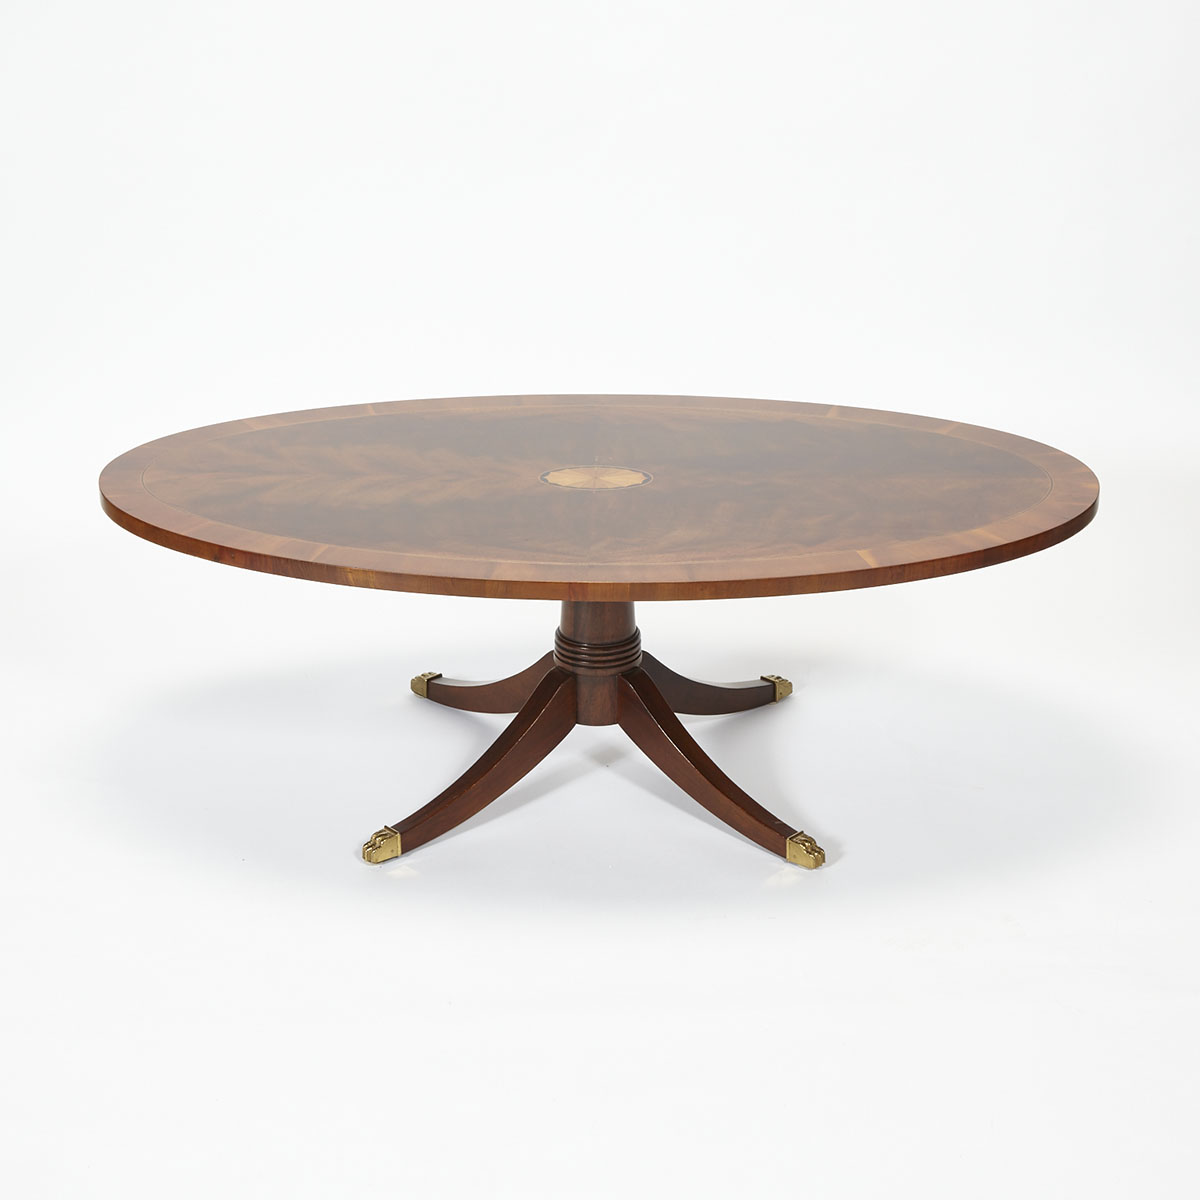 Regency Style Satinwood Inlaid Mahogany Oval Low Table, mid 20th century